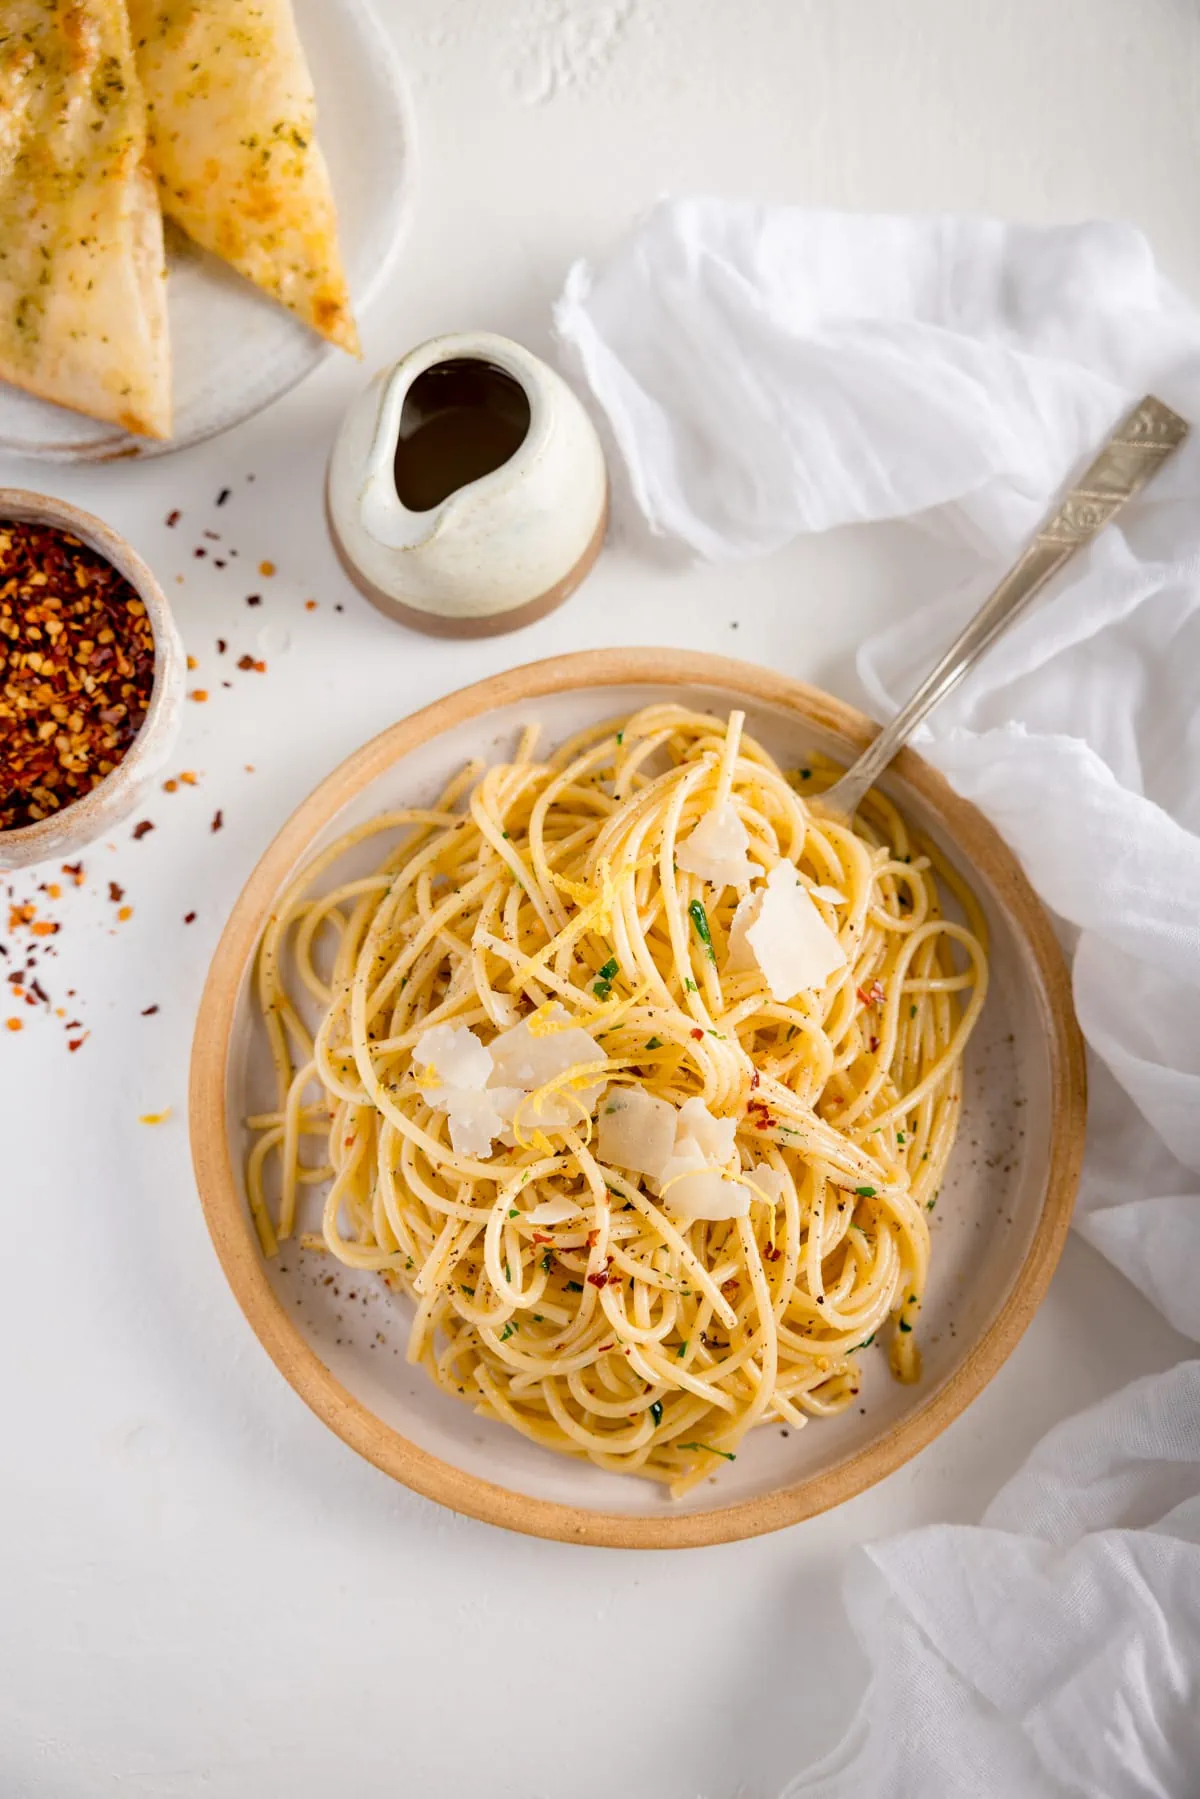 Overhead shot of Spaghetti aglio e olio on white plate with a stone rim. The plate is on a white background next to a white napkin. There is a pinch pot of chilli flakes, a white plate with garlic bread slices and a little stone jug also in shot.